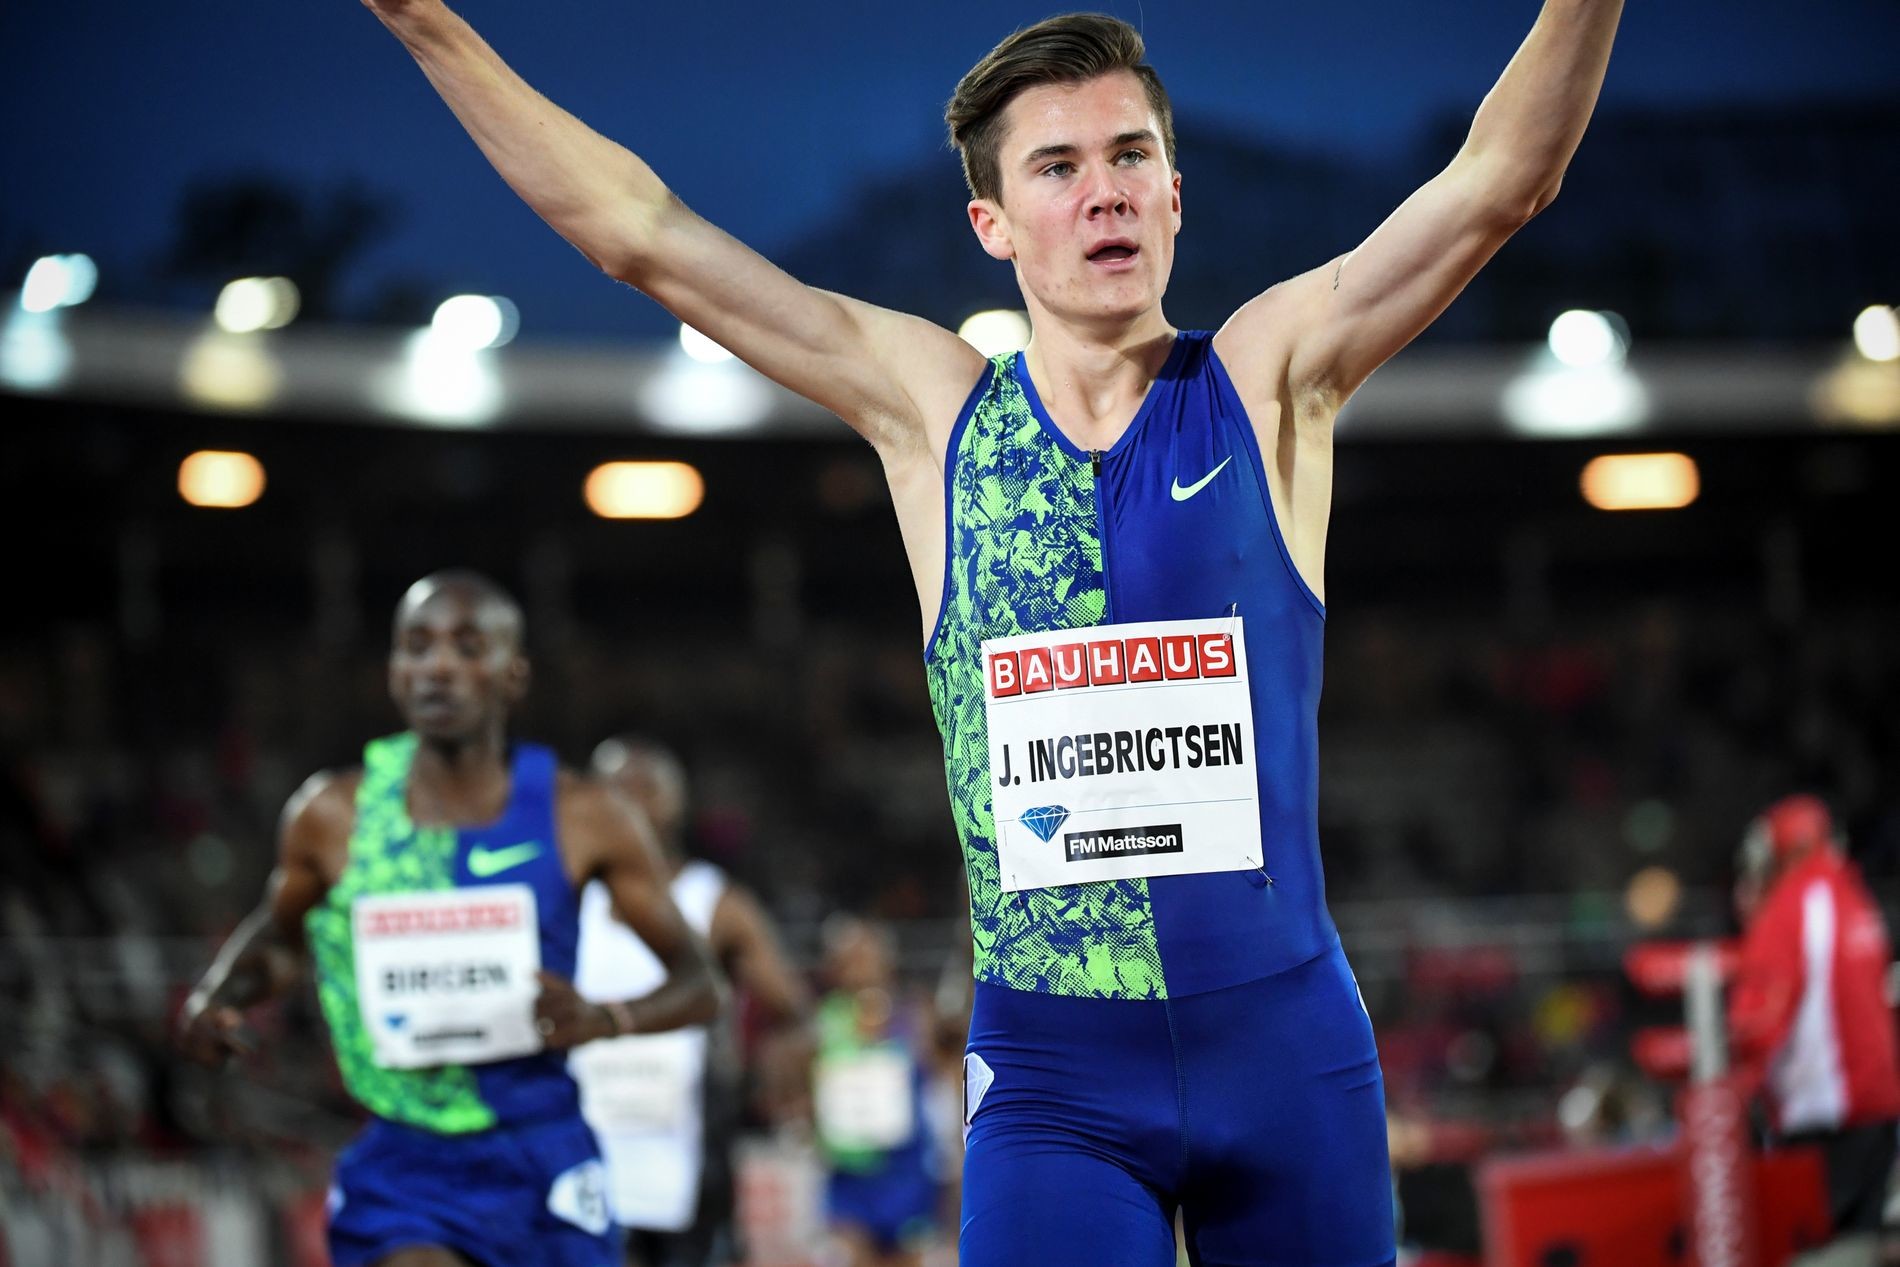 Jakob Ingebrigtsen will be among the athletes looking to test their form when he races over 1500m at the Muller Grand Prix  in Gateshead, UK, on Sunday May 23